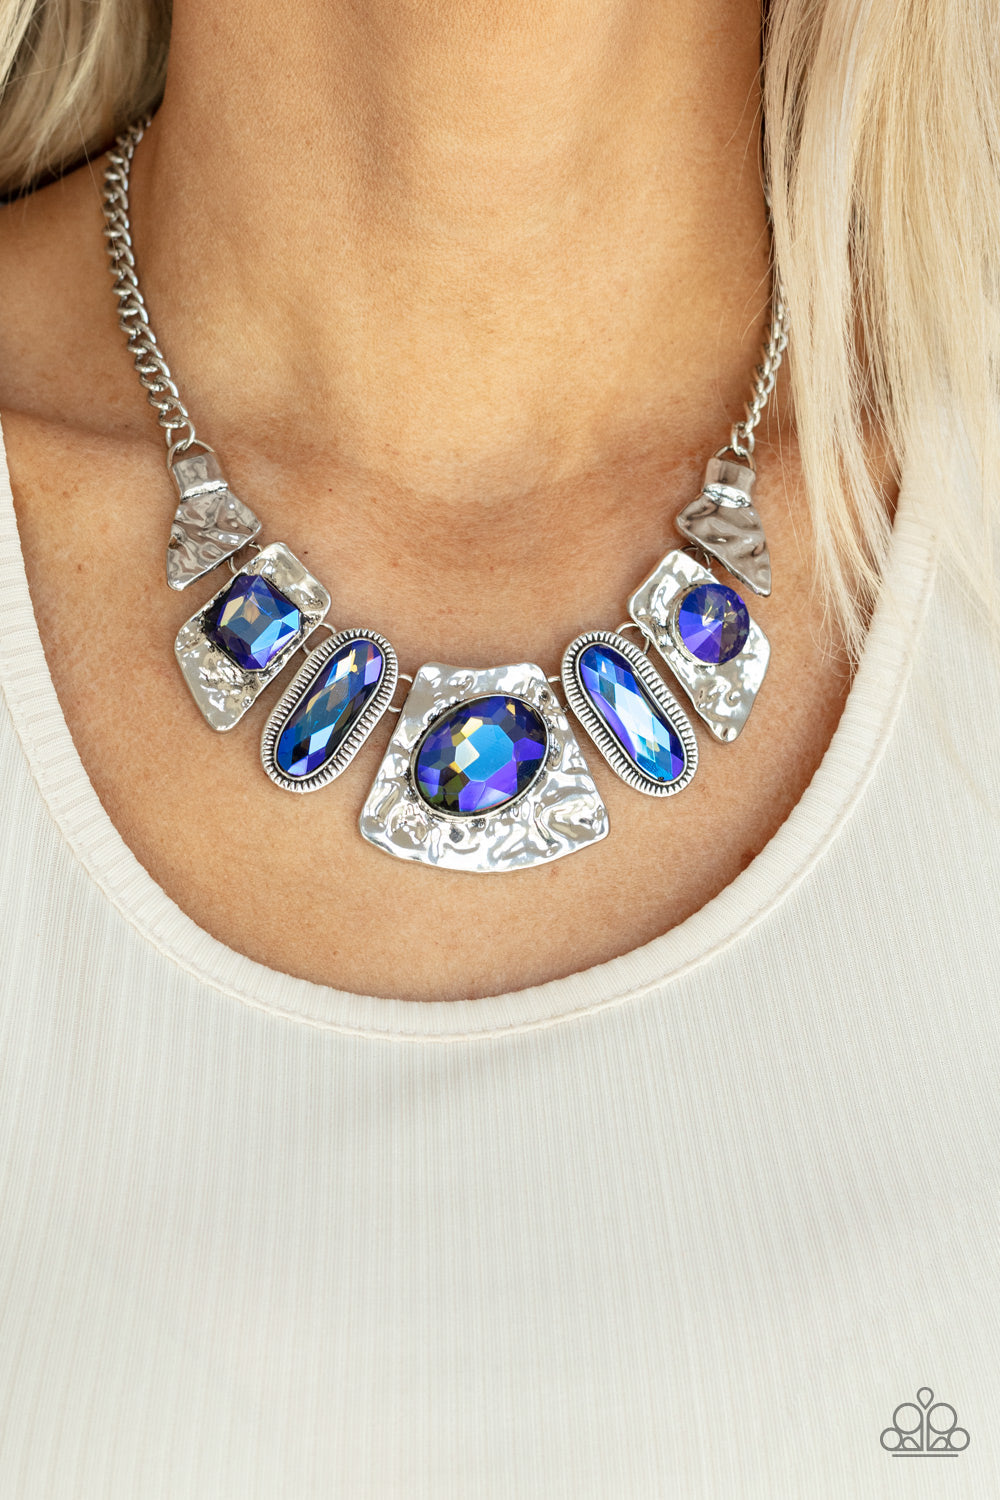 PRE-ORDER - Paparazzi Futuristic Fashionista - Blue - Necklace & Earrings - $5 Jewelry with Ashley Swint